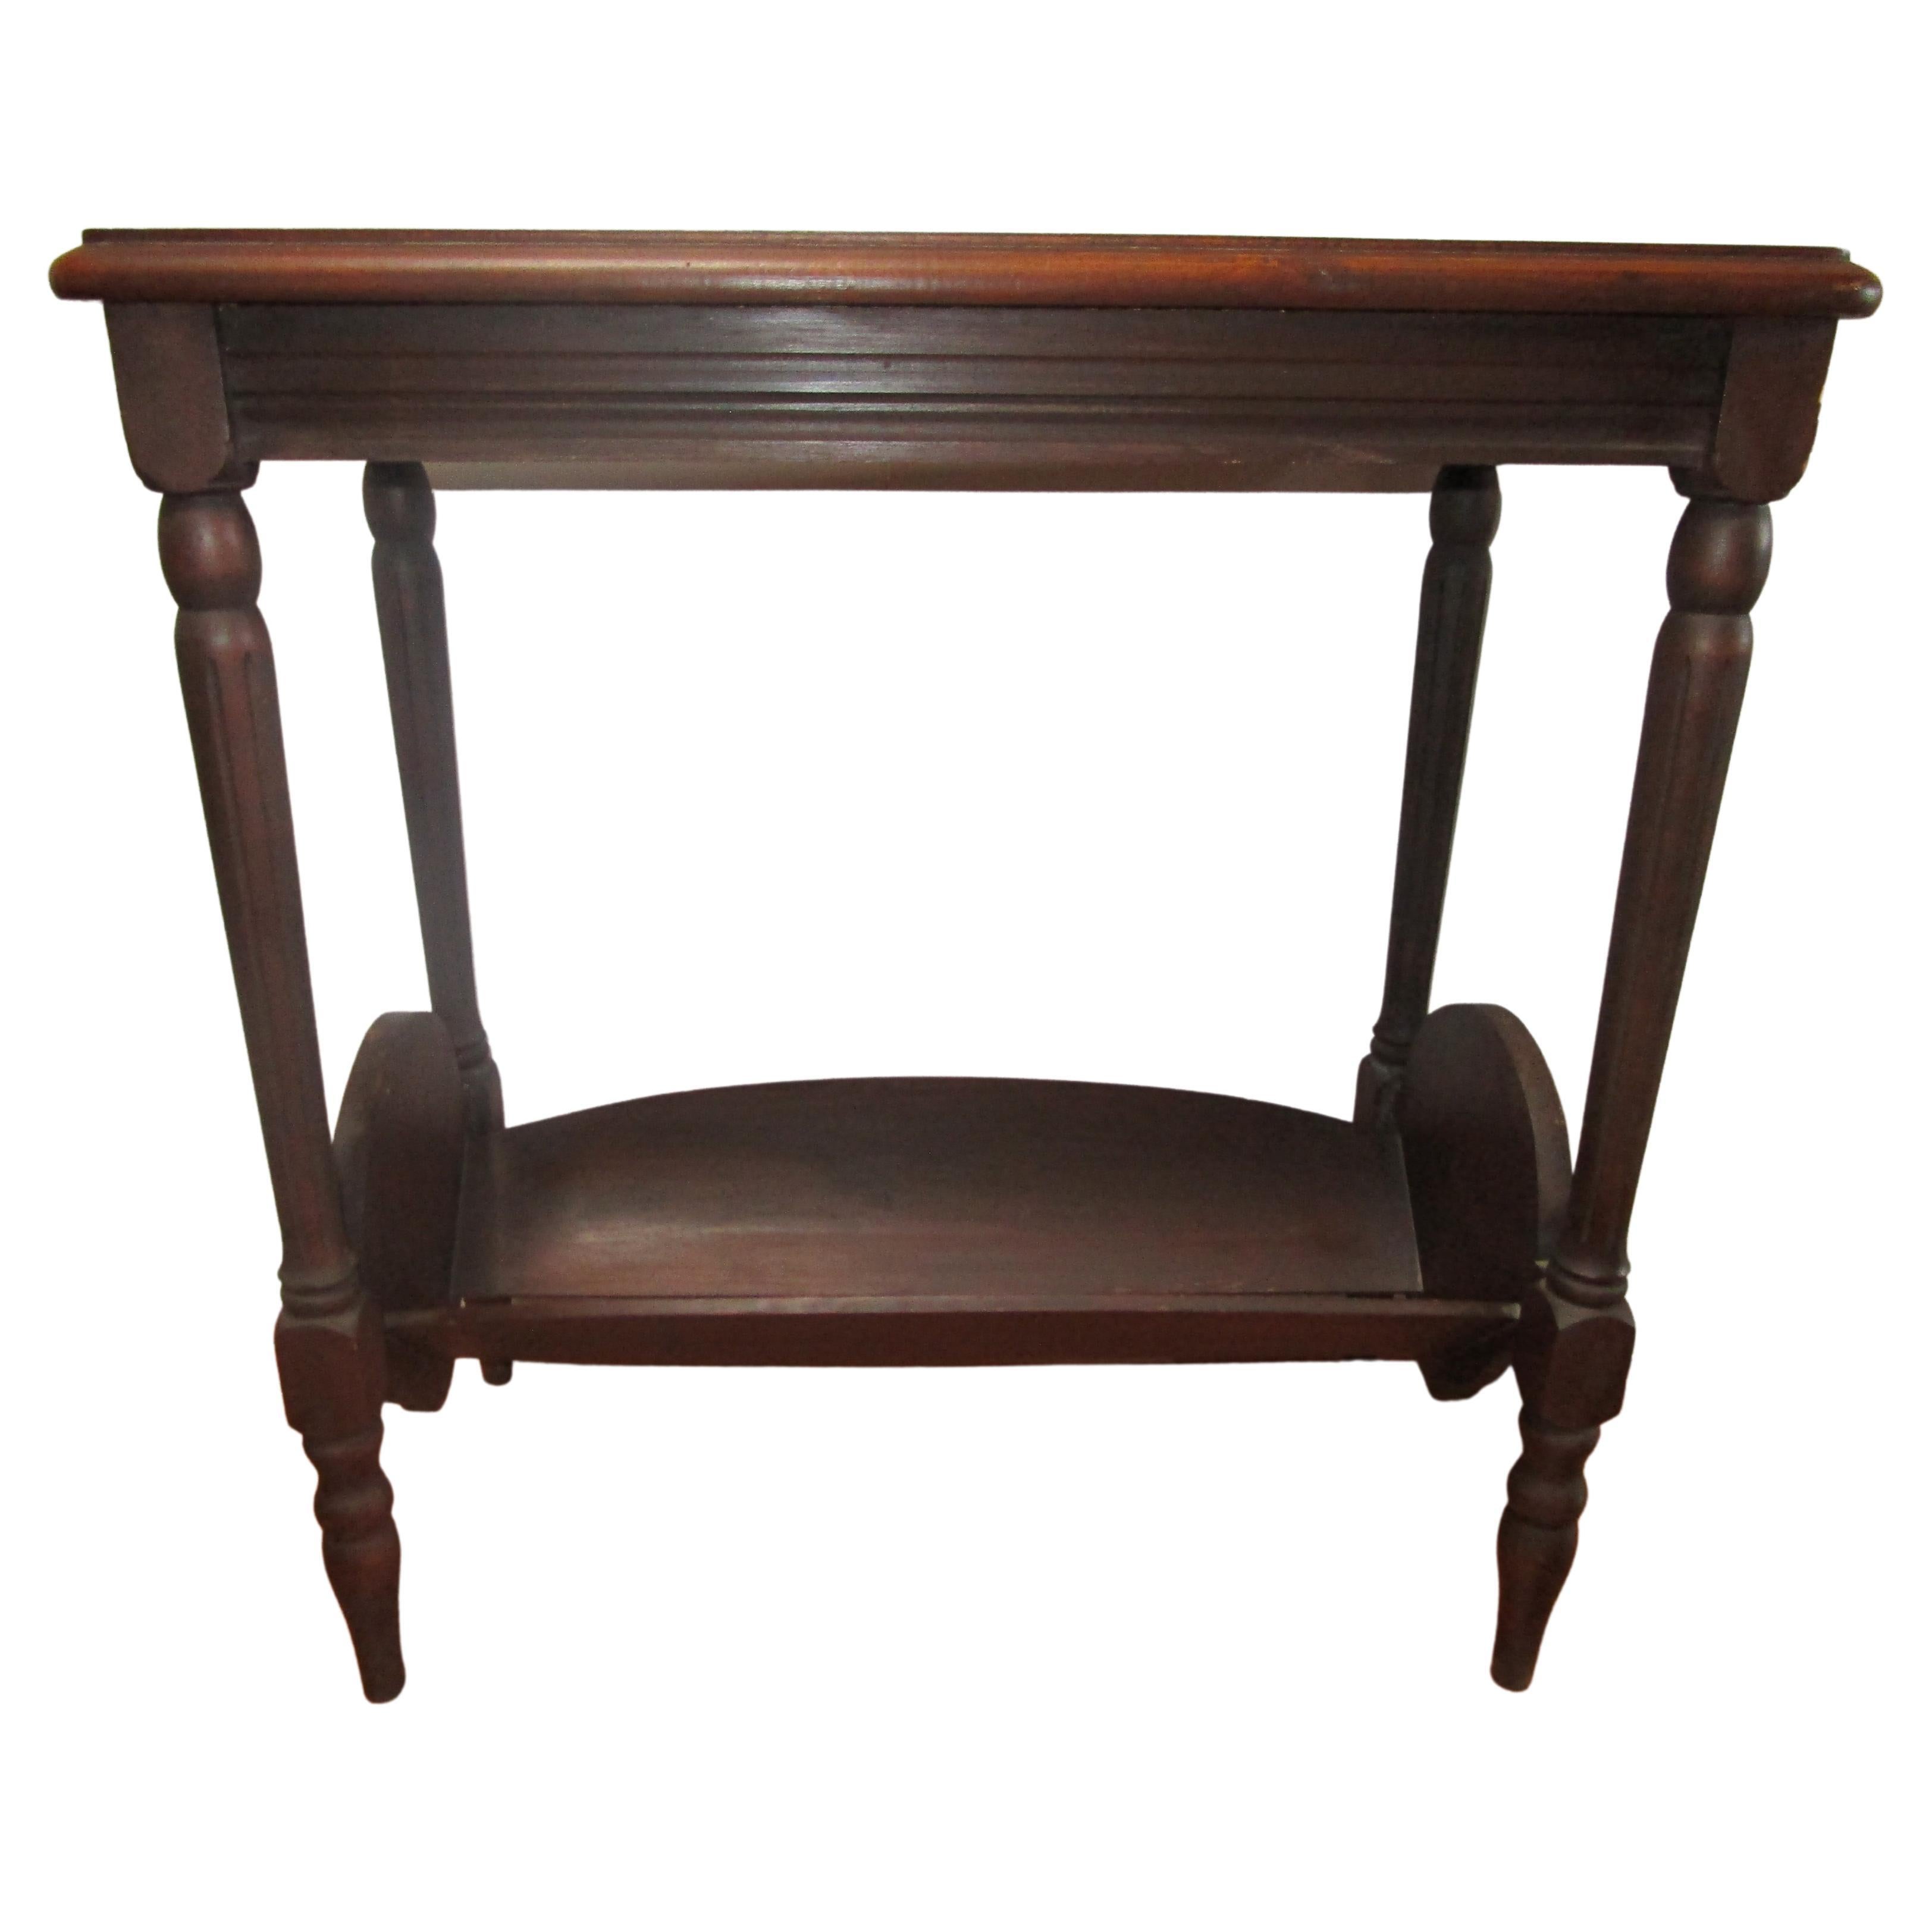 1930s Colonial Revival Style Turned  and Veneered Occasional Bookshelf Table